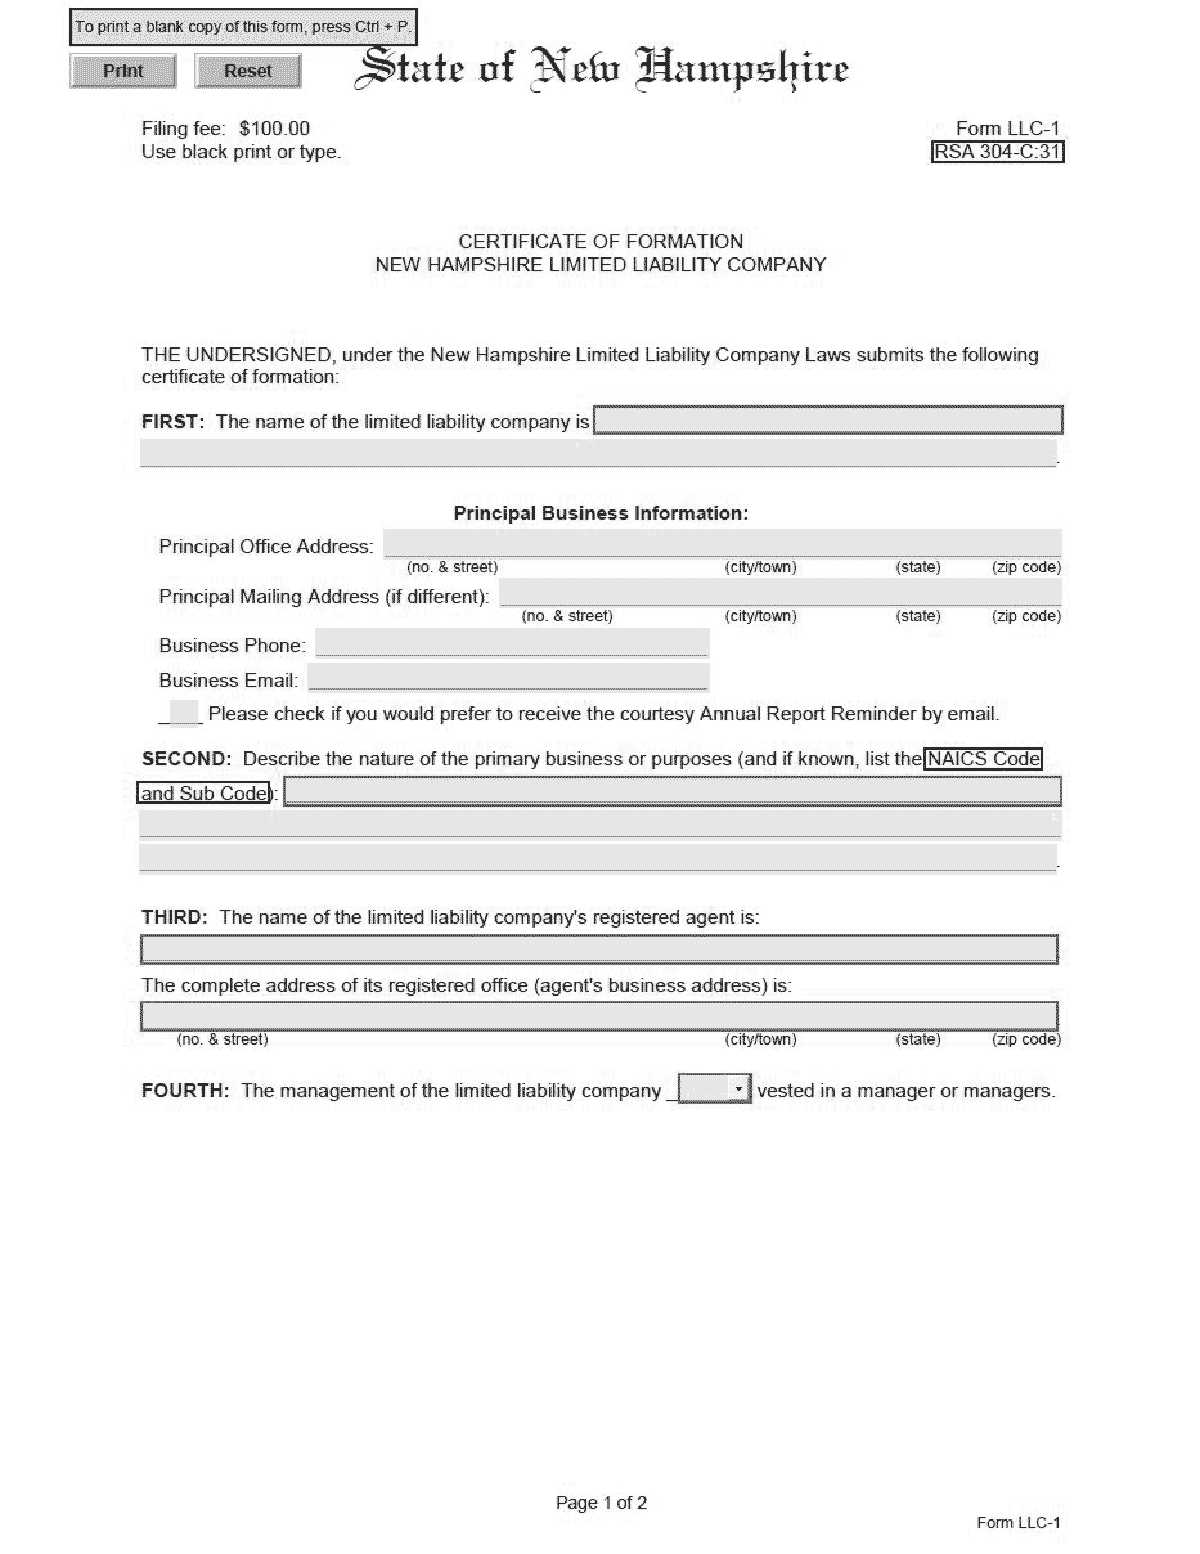 nh secretary of state llc forms